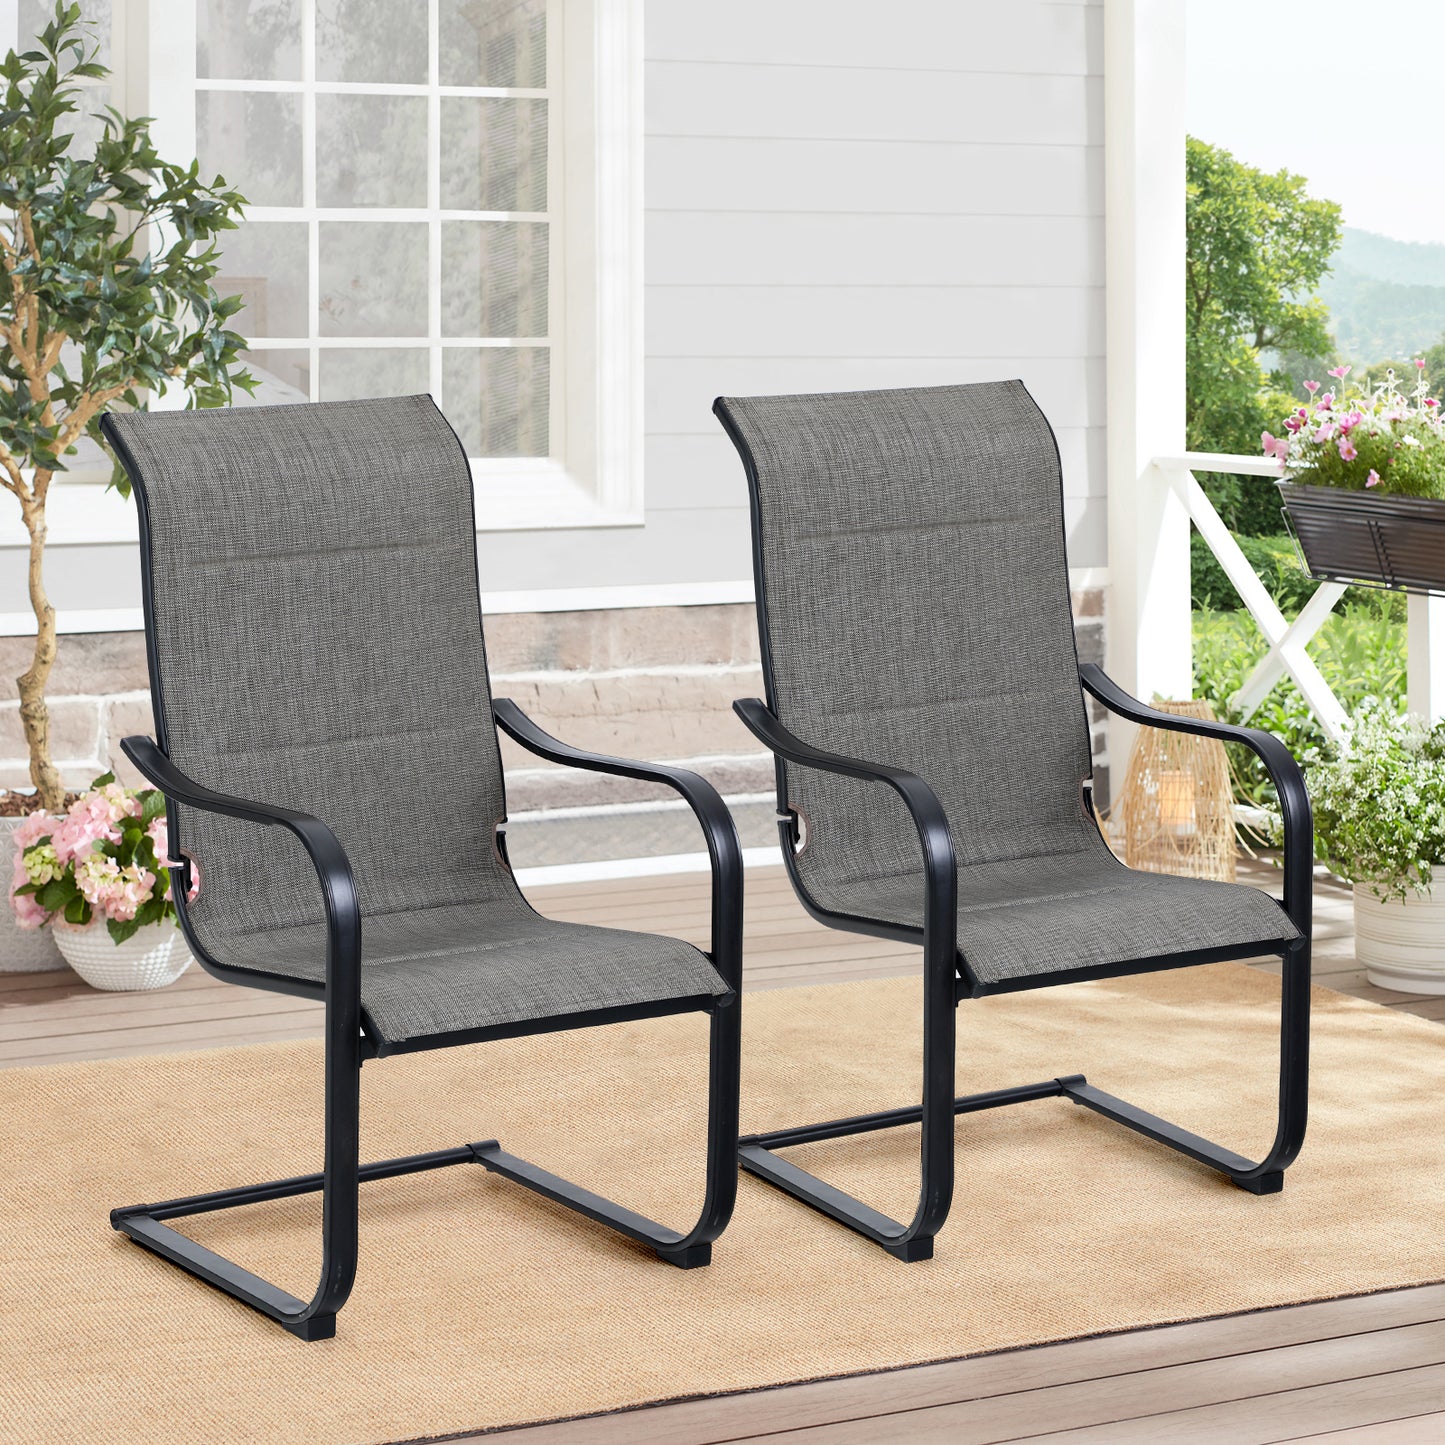 Sophia & William Patio Dining Chairs High Back Patio Chairs C Spring Motion Chairs 2 Pieces Quick Dry Textilene Outdoor Furniture Support 350lbs for Lawn Garden Balcony Pool Backyard Weather Resistant